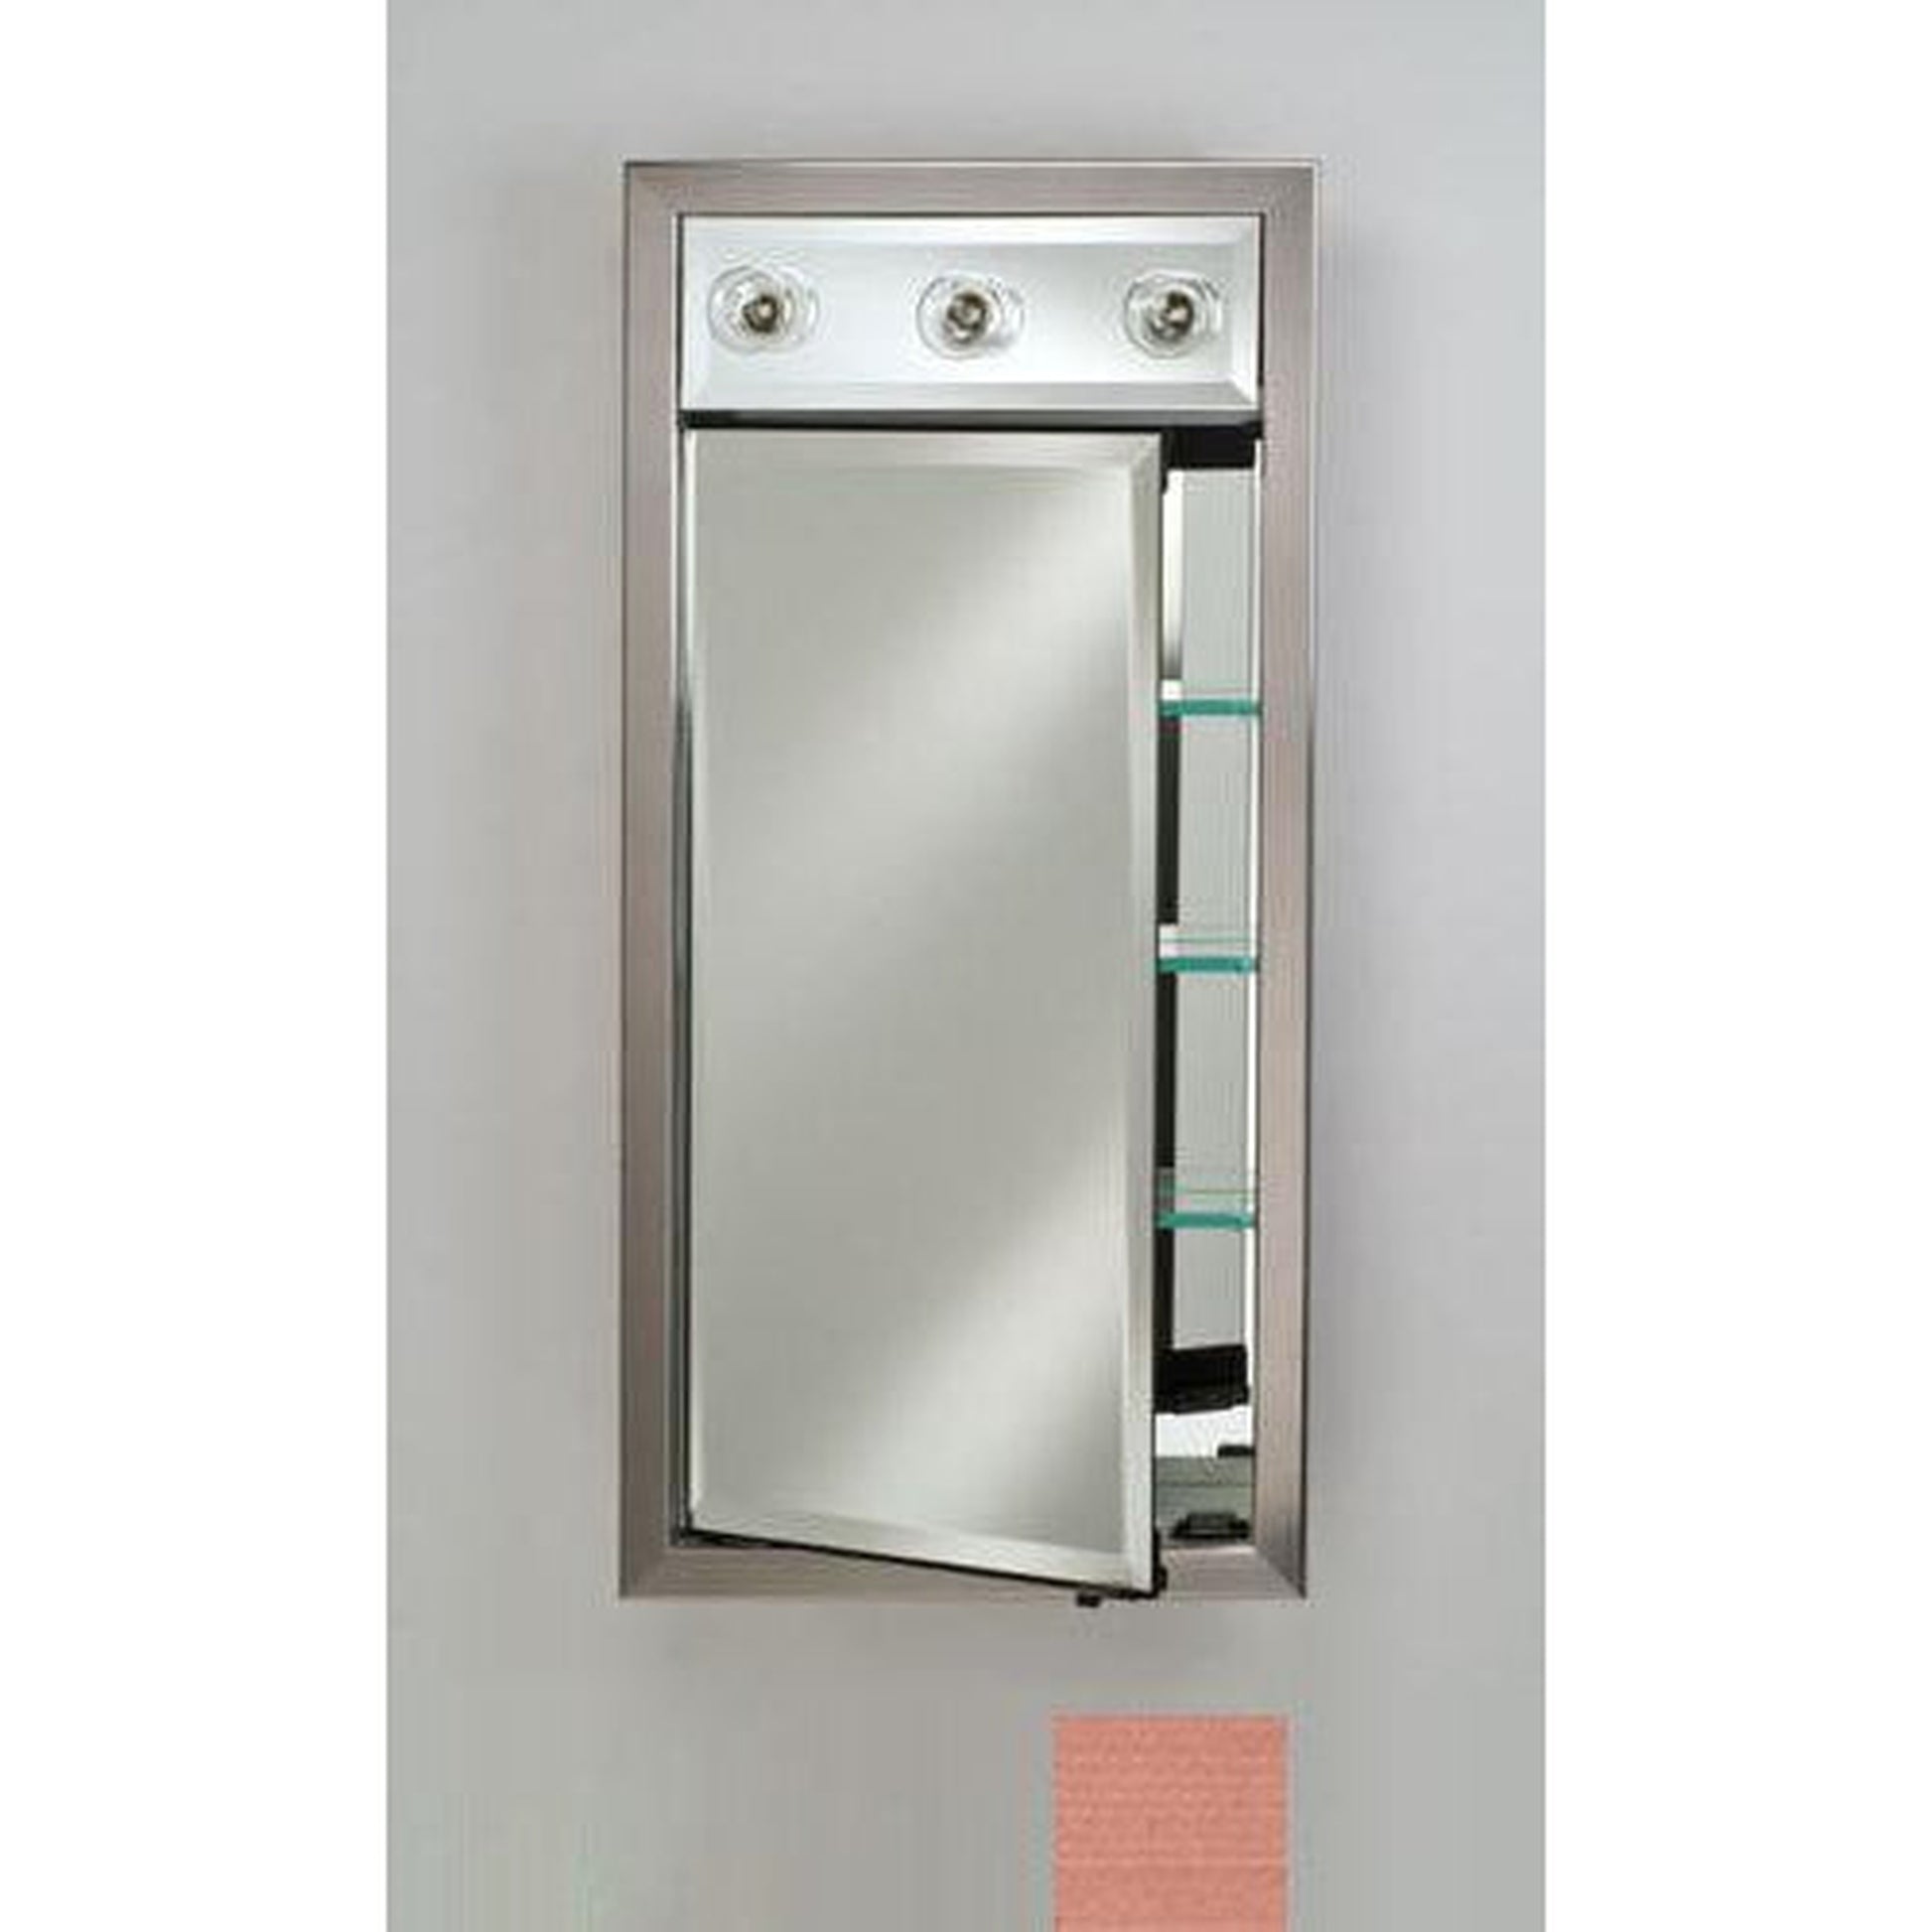 Afina Signature 17" x 30" Soho Brushed Bronze Recessed Right Hinged Single Door Medicine Cabinet With Contemporary Lights